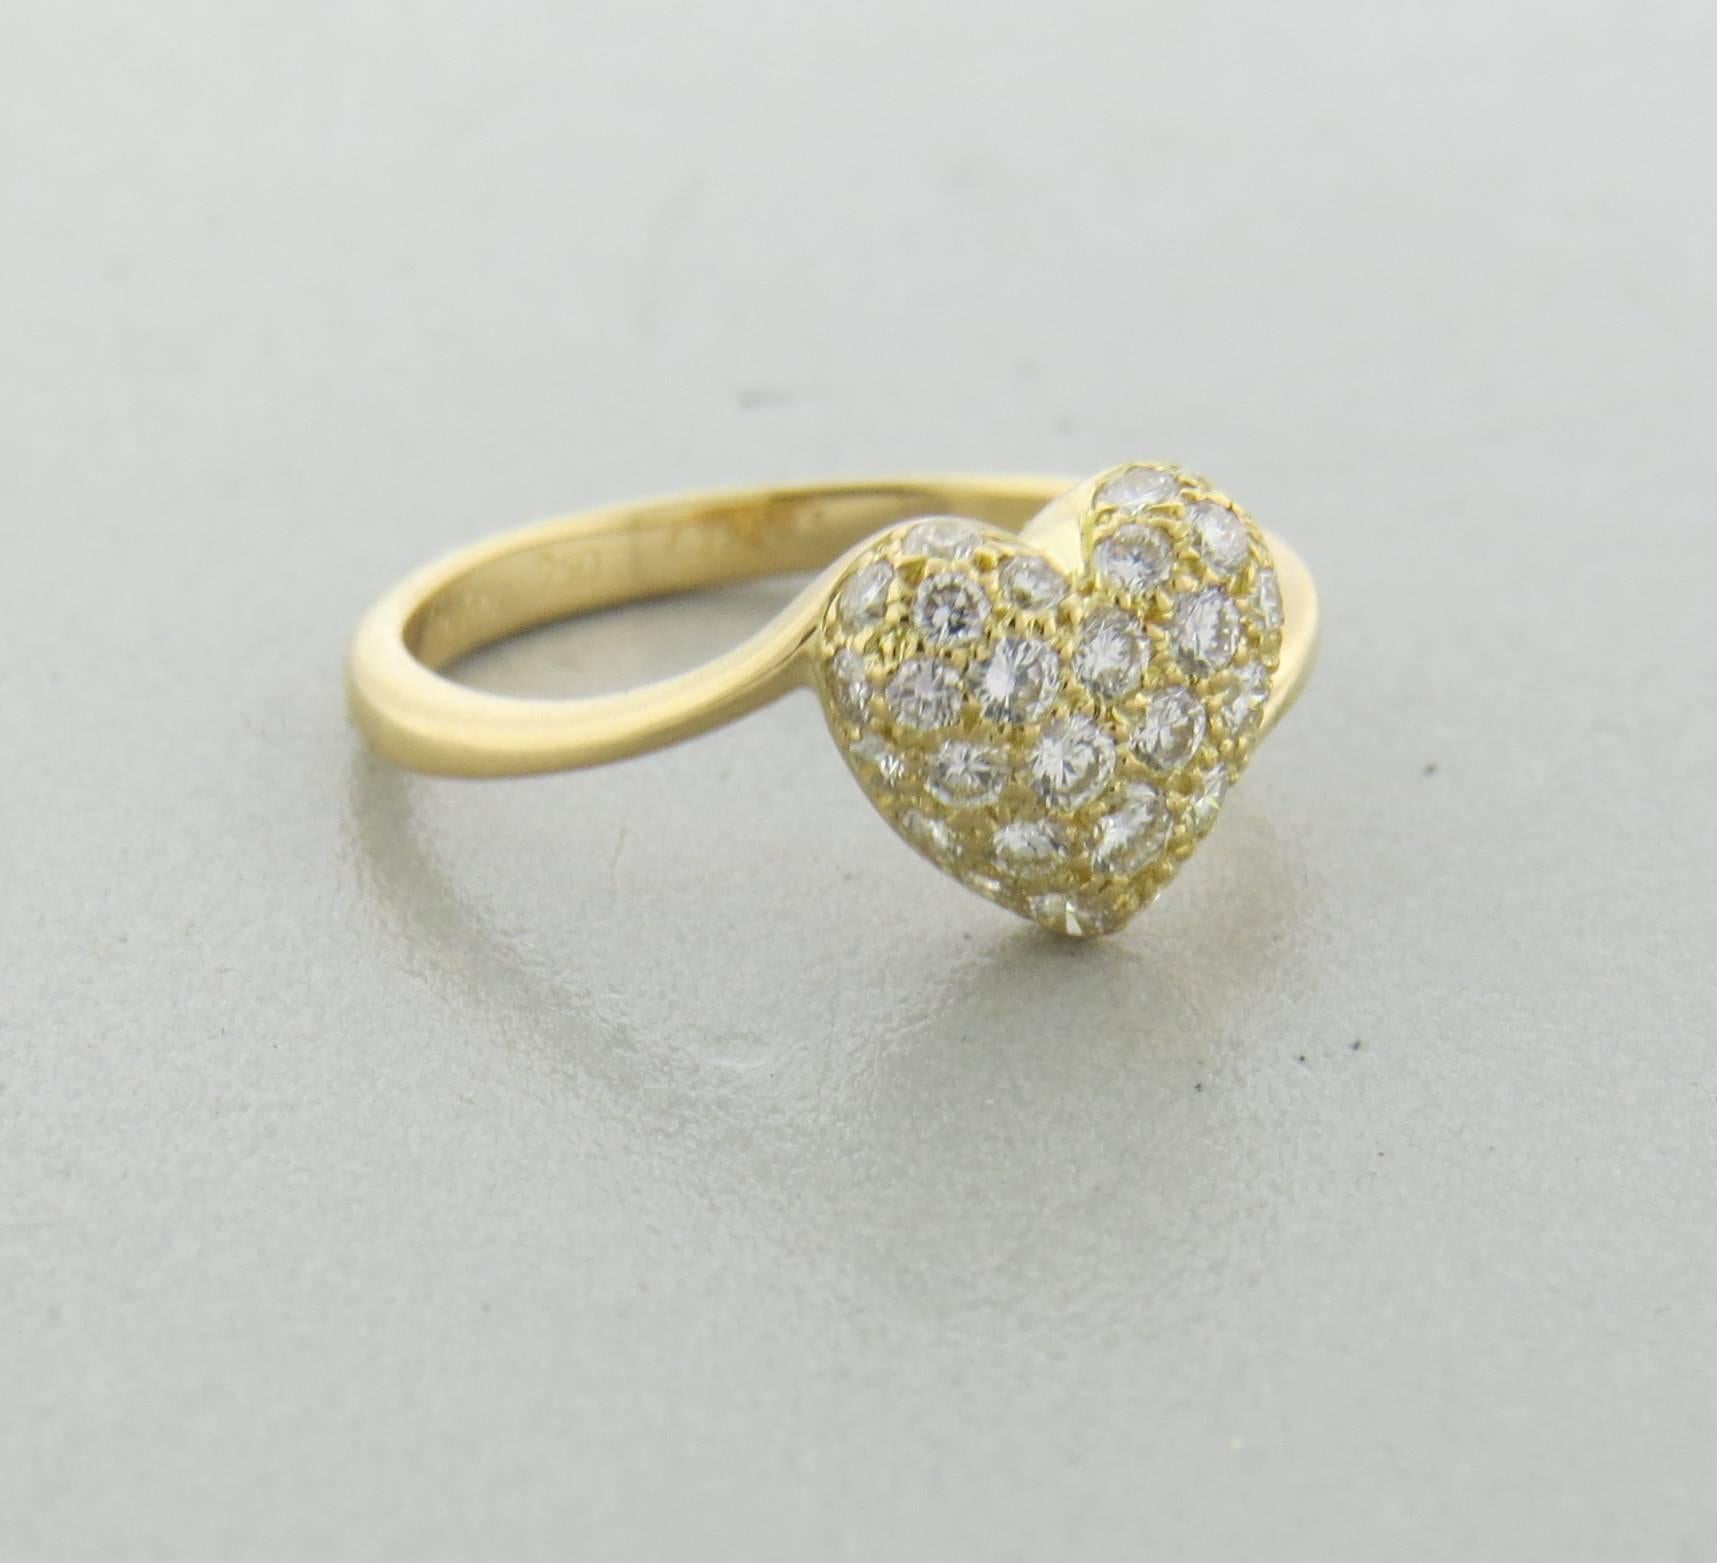 Delicate 18k yellow gold ring, crafted by Cartier, featuring heart top, set with approx. 0.68ctw in G/Vs diamonds. Ring size 7, ring top is 9.2mm x 9.8mm. Marked: Cartier, 750, E37325, 54, French mark. Weight of the piece - 3.1 grams